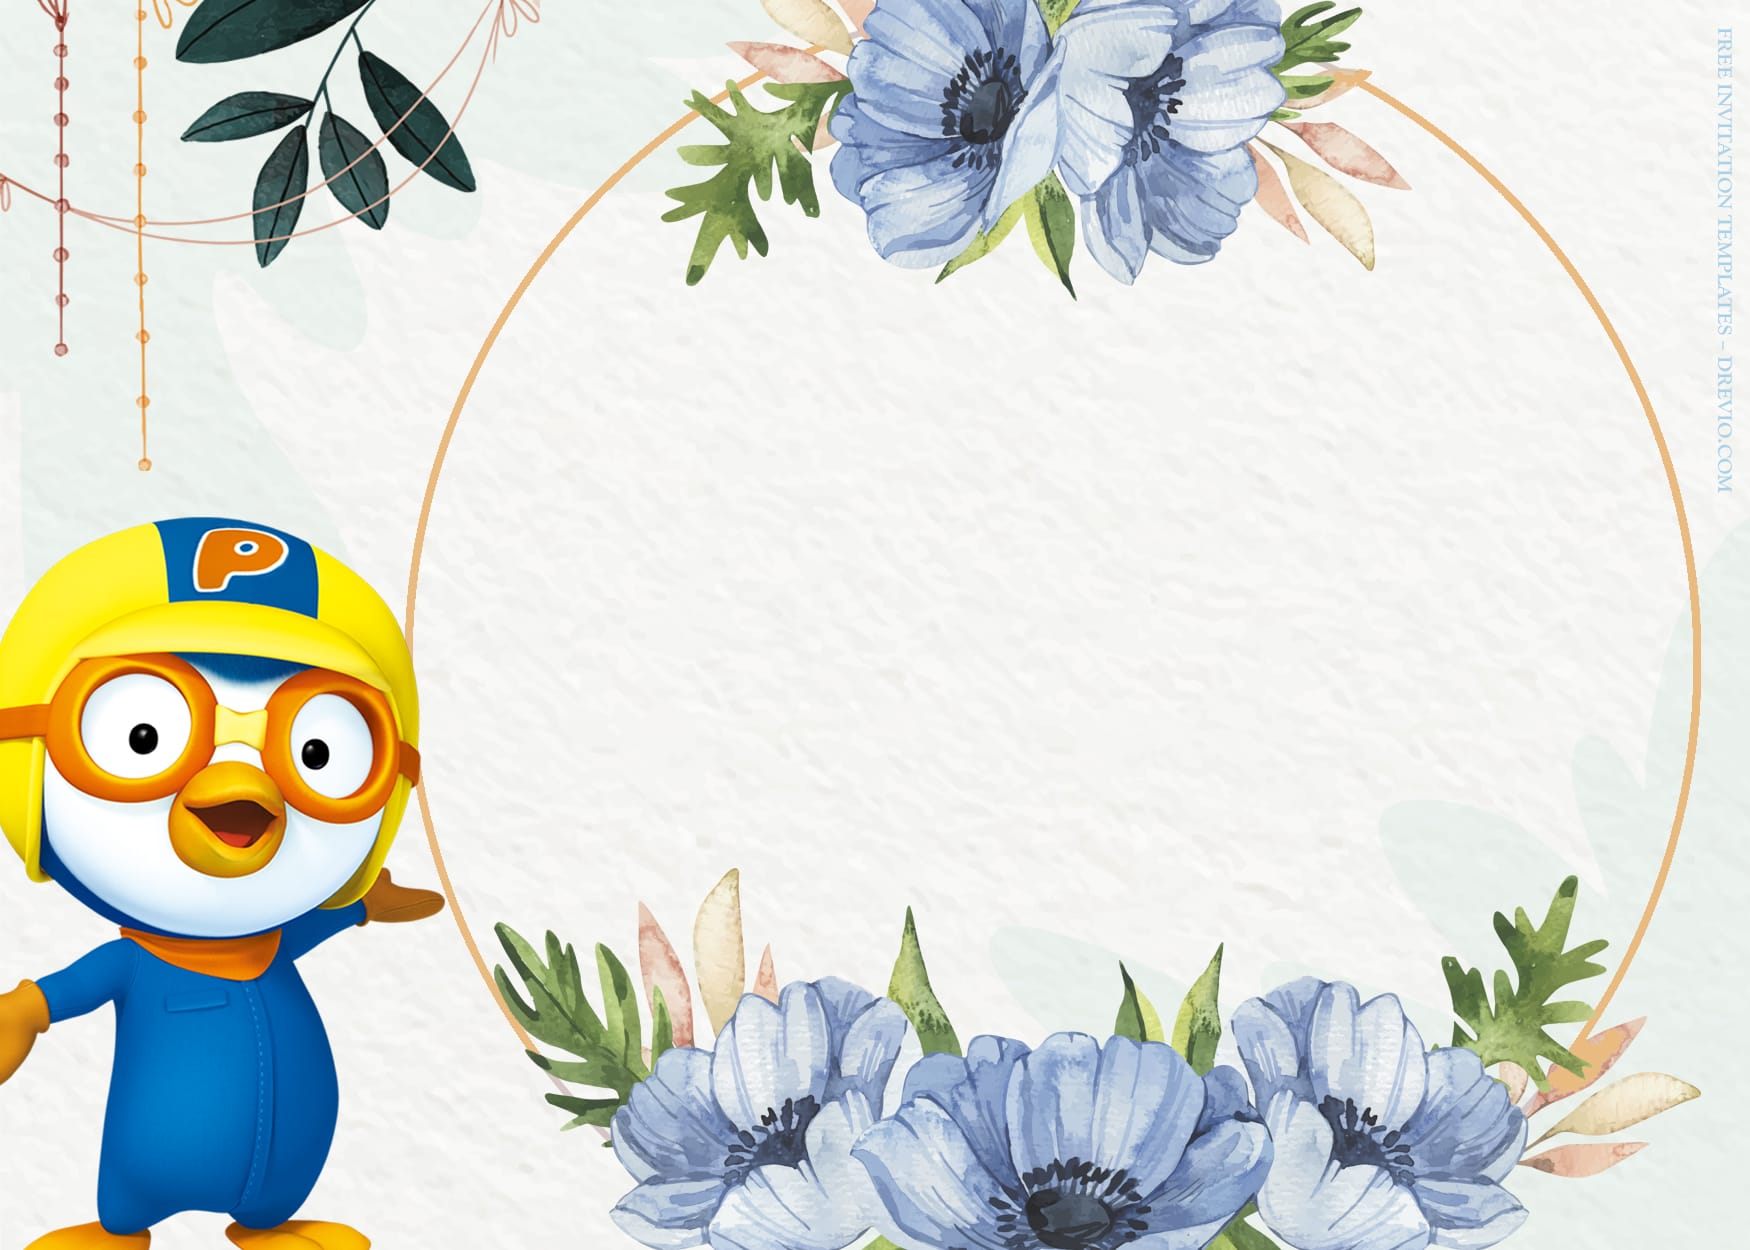 8+ Play Tag With Pororo And Friends Birthday Invitation Templates Type Three